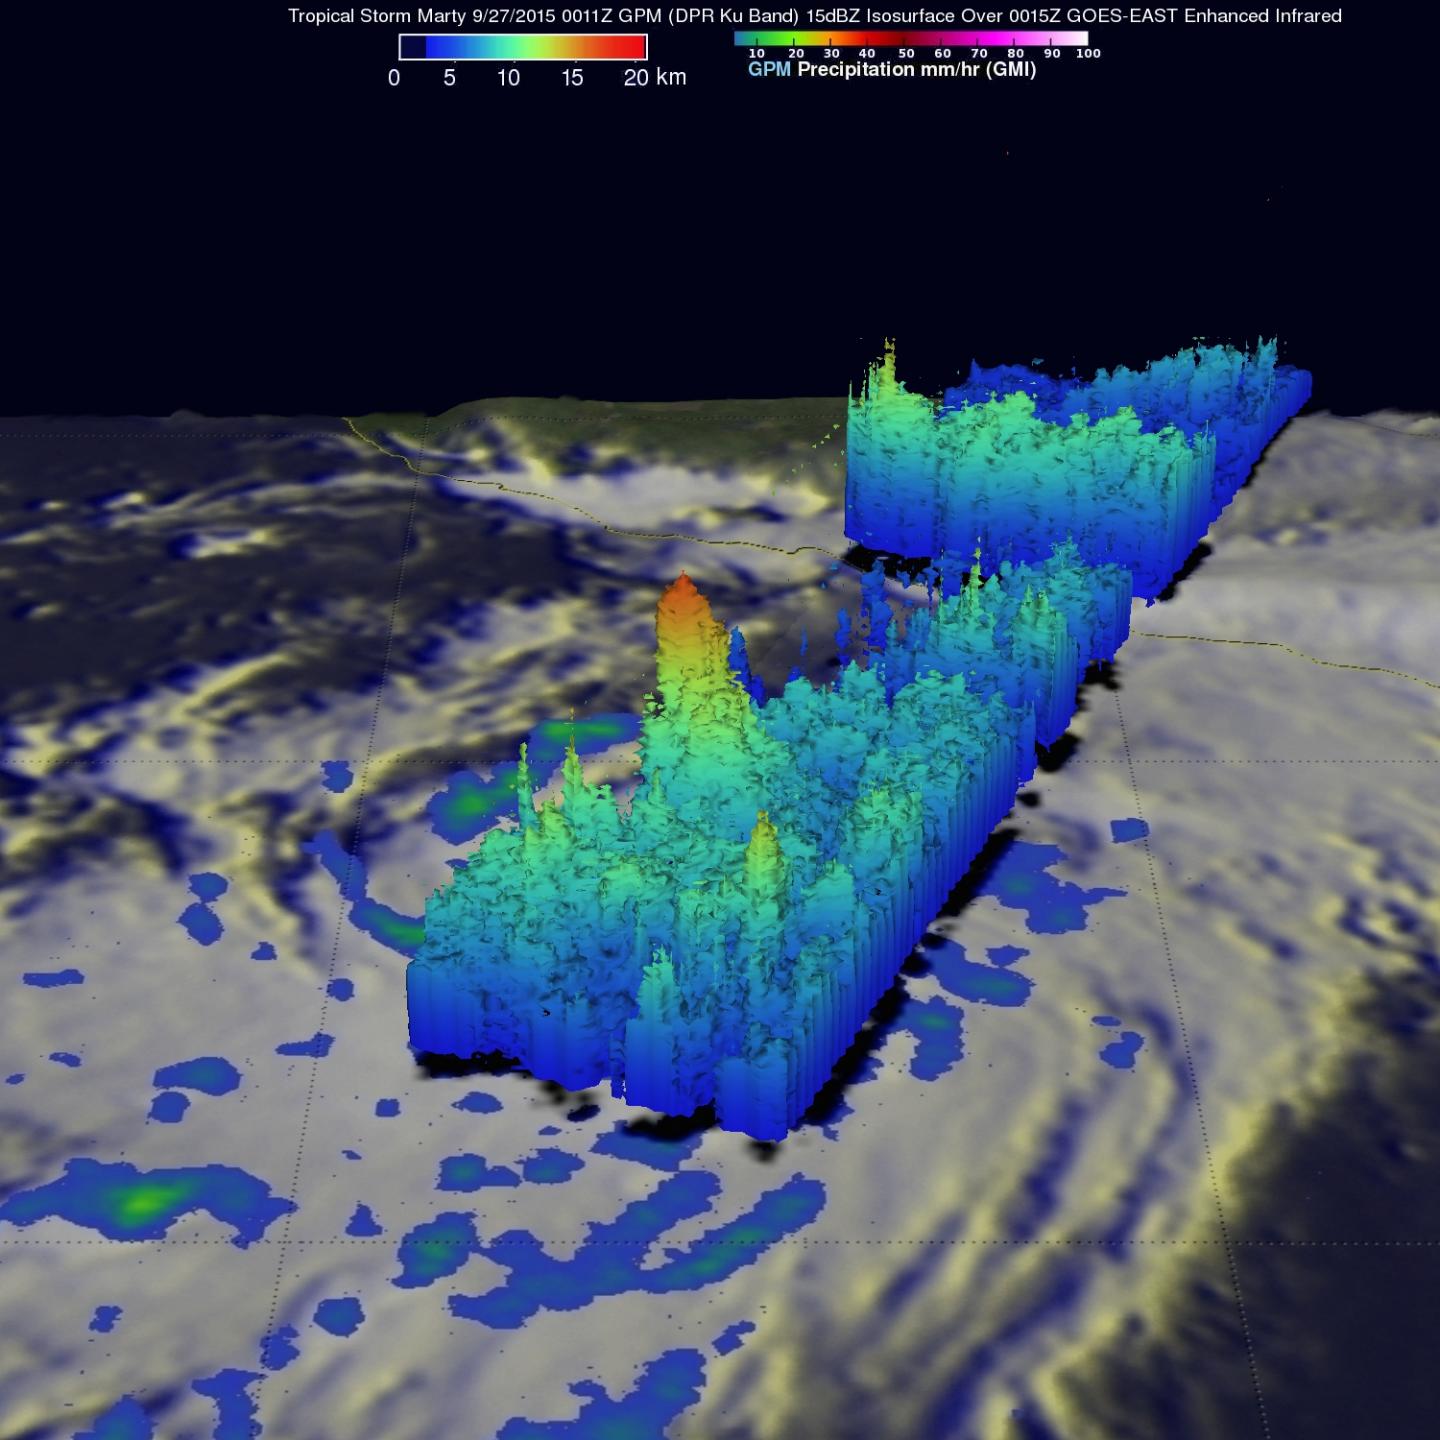 GPM 3-D Image of Marty